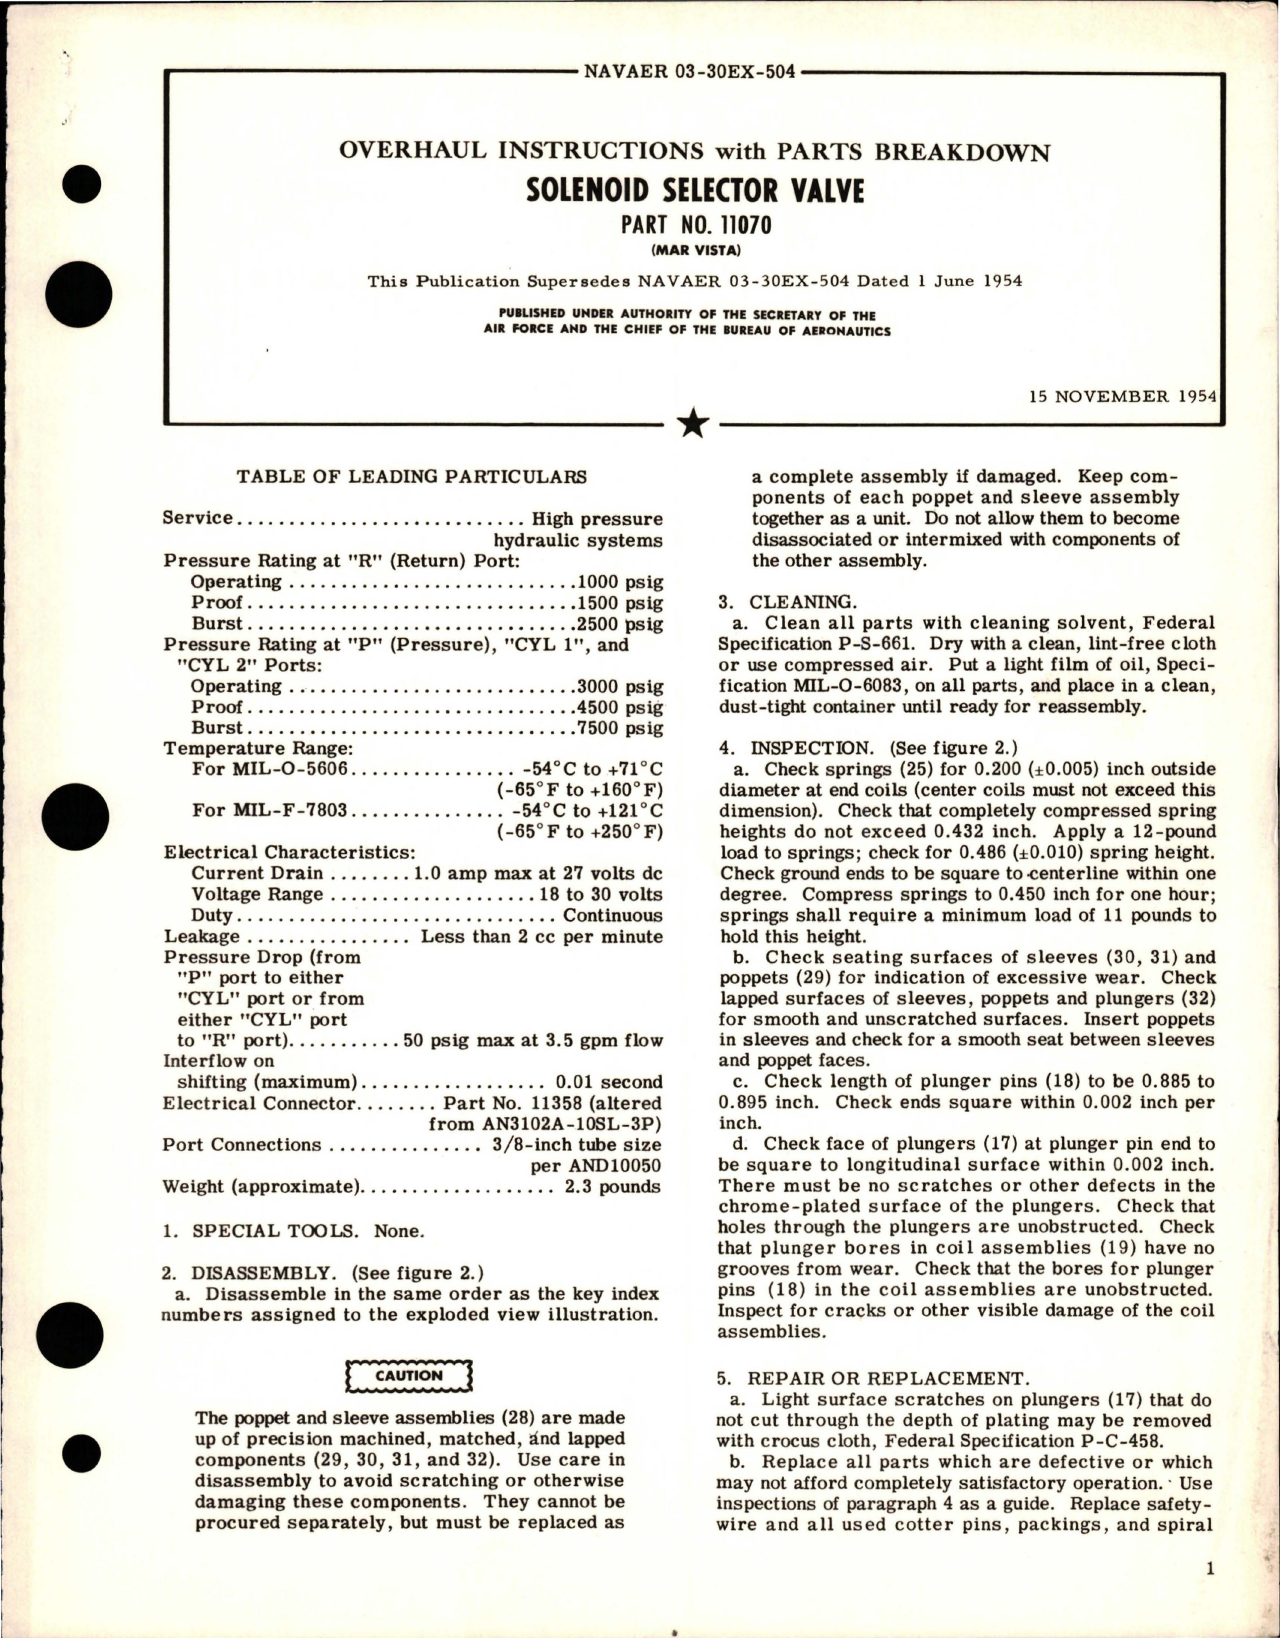 Sample page 1 from AirCorps Library document: Overhaul Instructions with Parts Breakdown for Solenoid Selector Valve - Part 11070